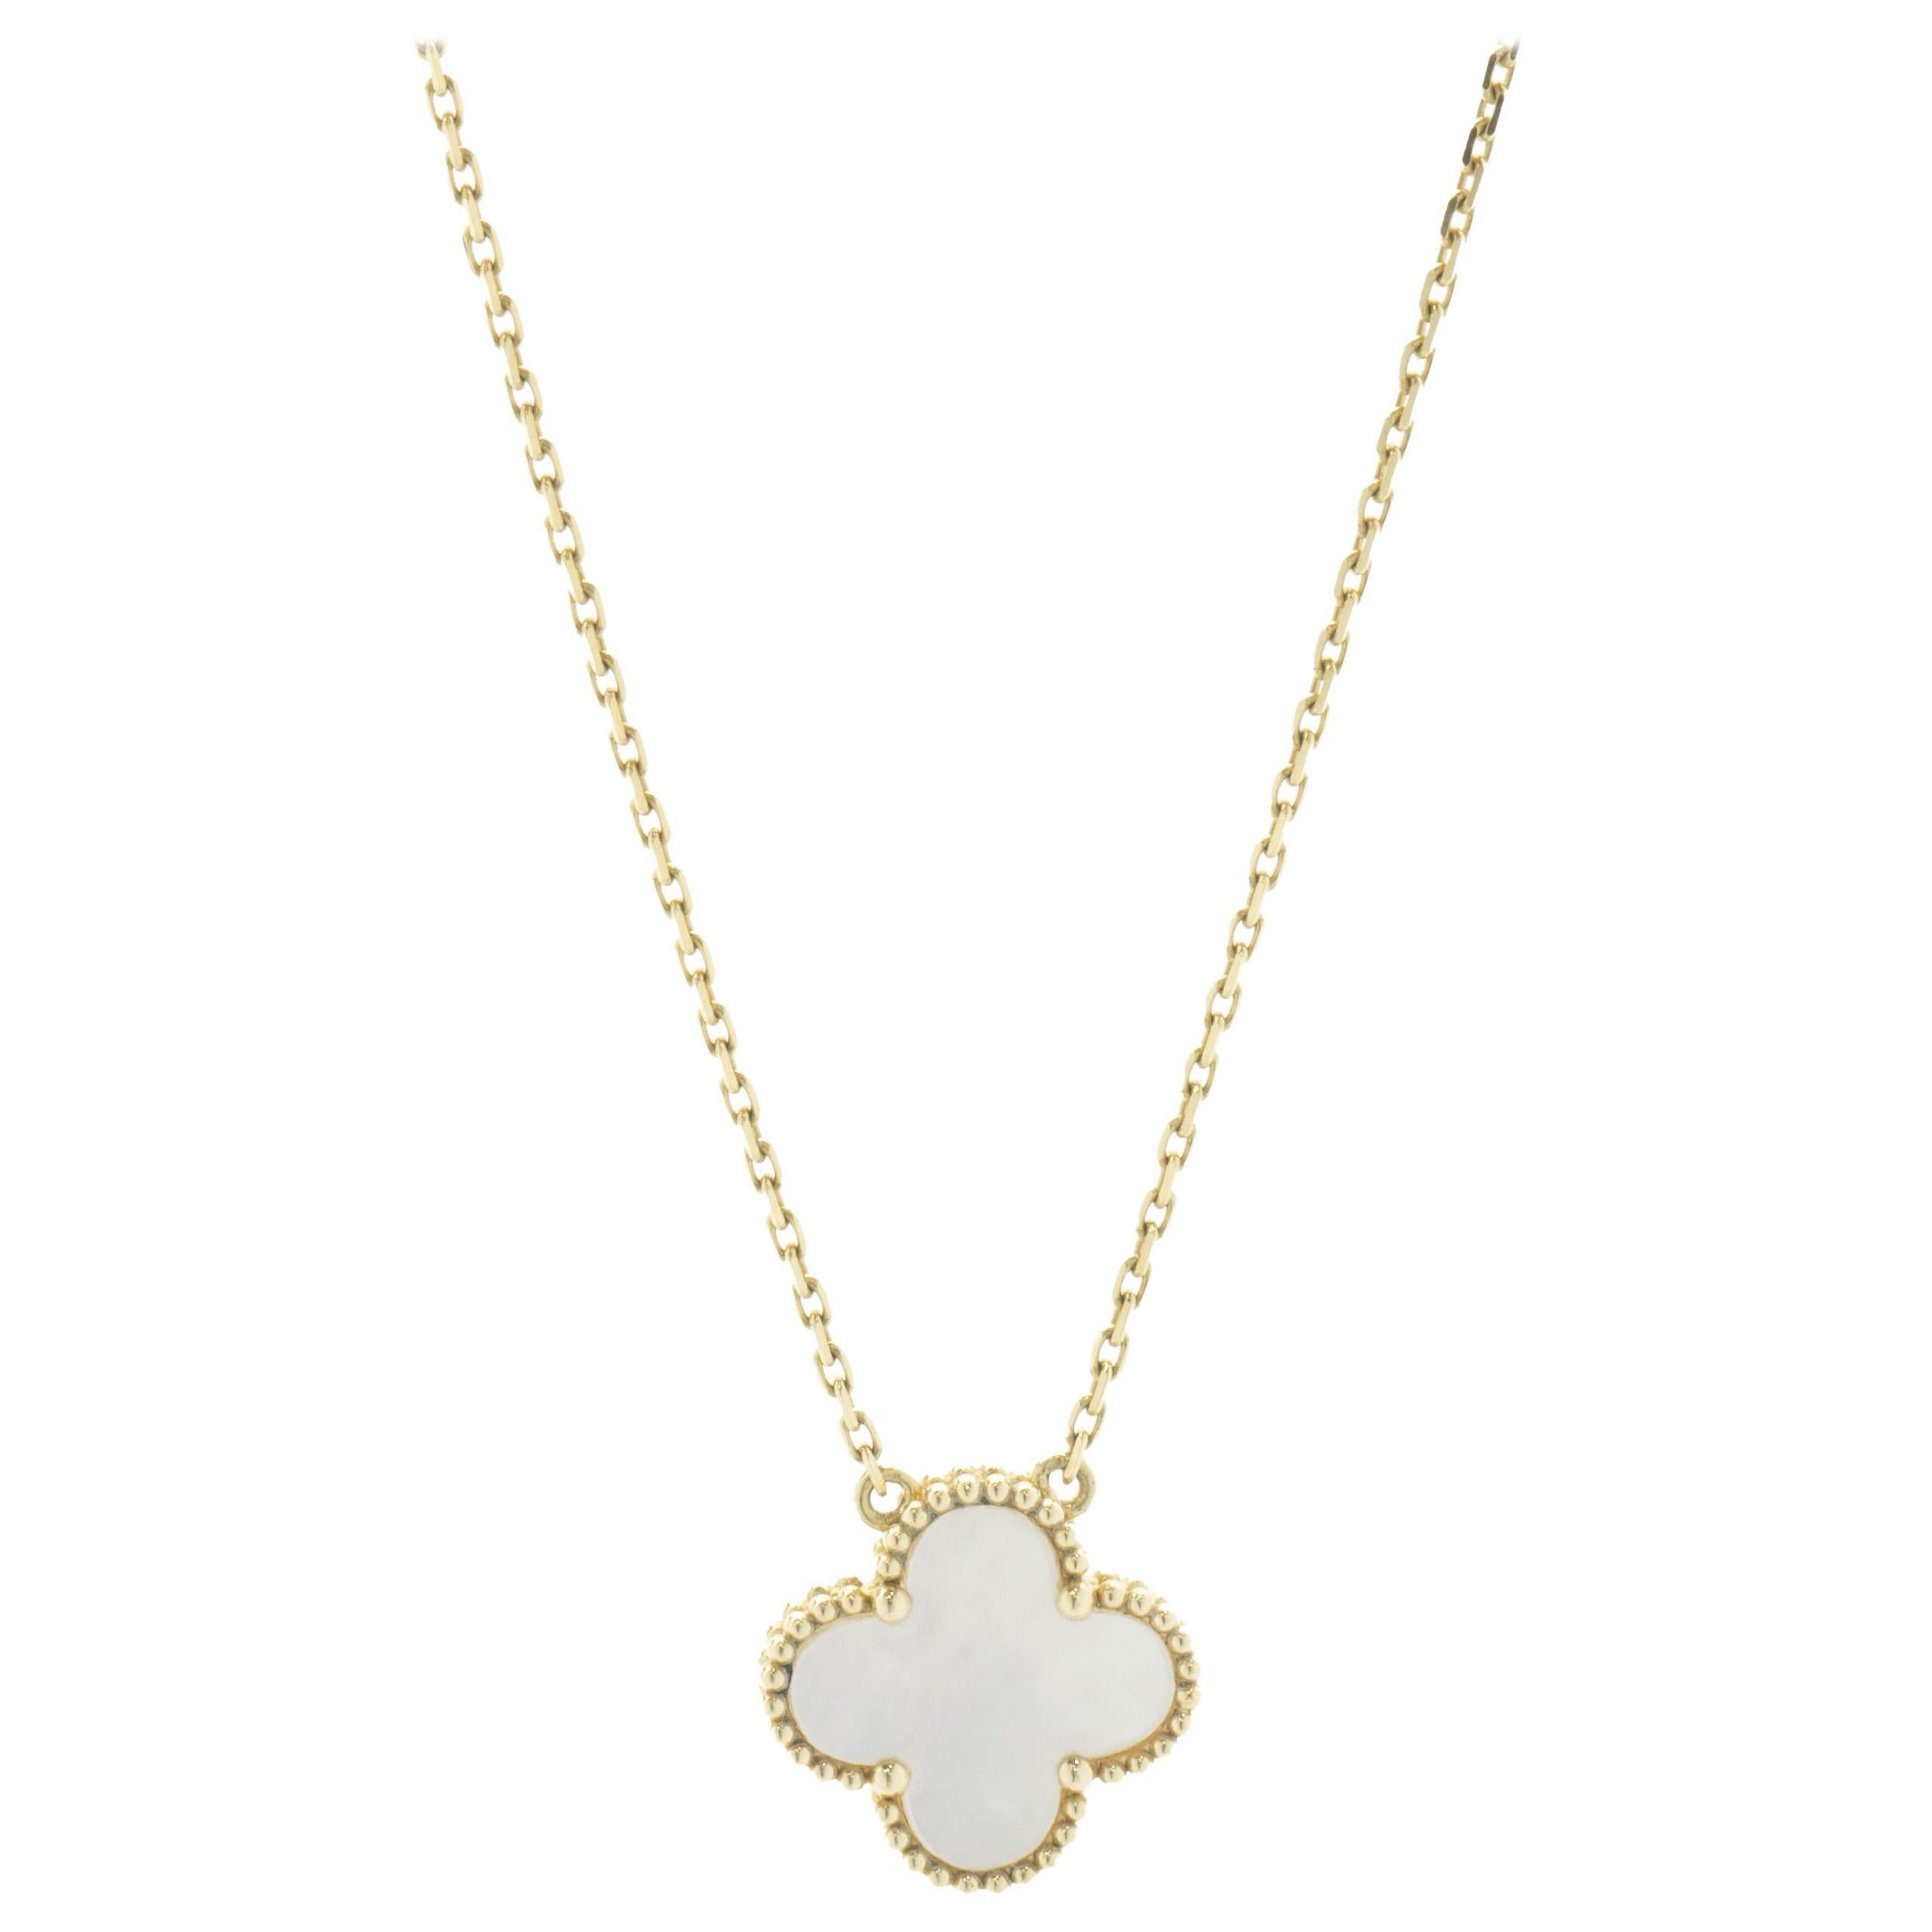 18 Karat Yellow Gold Mother of Pearl Clover Solitaire Necklace